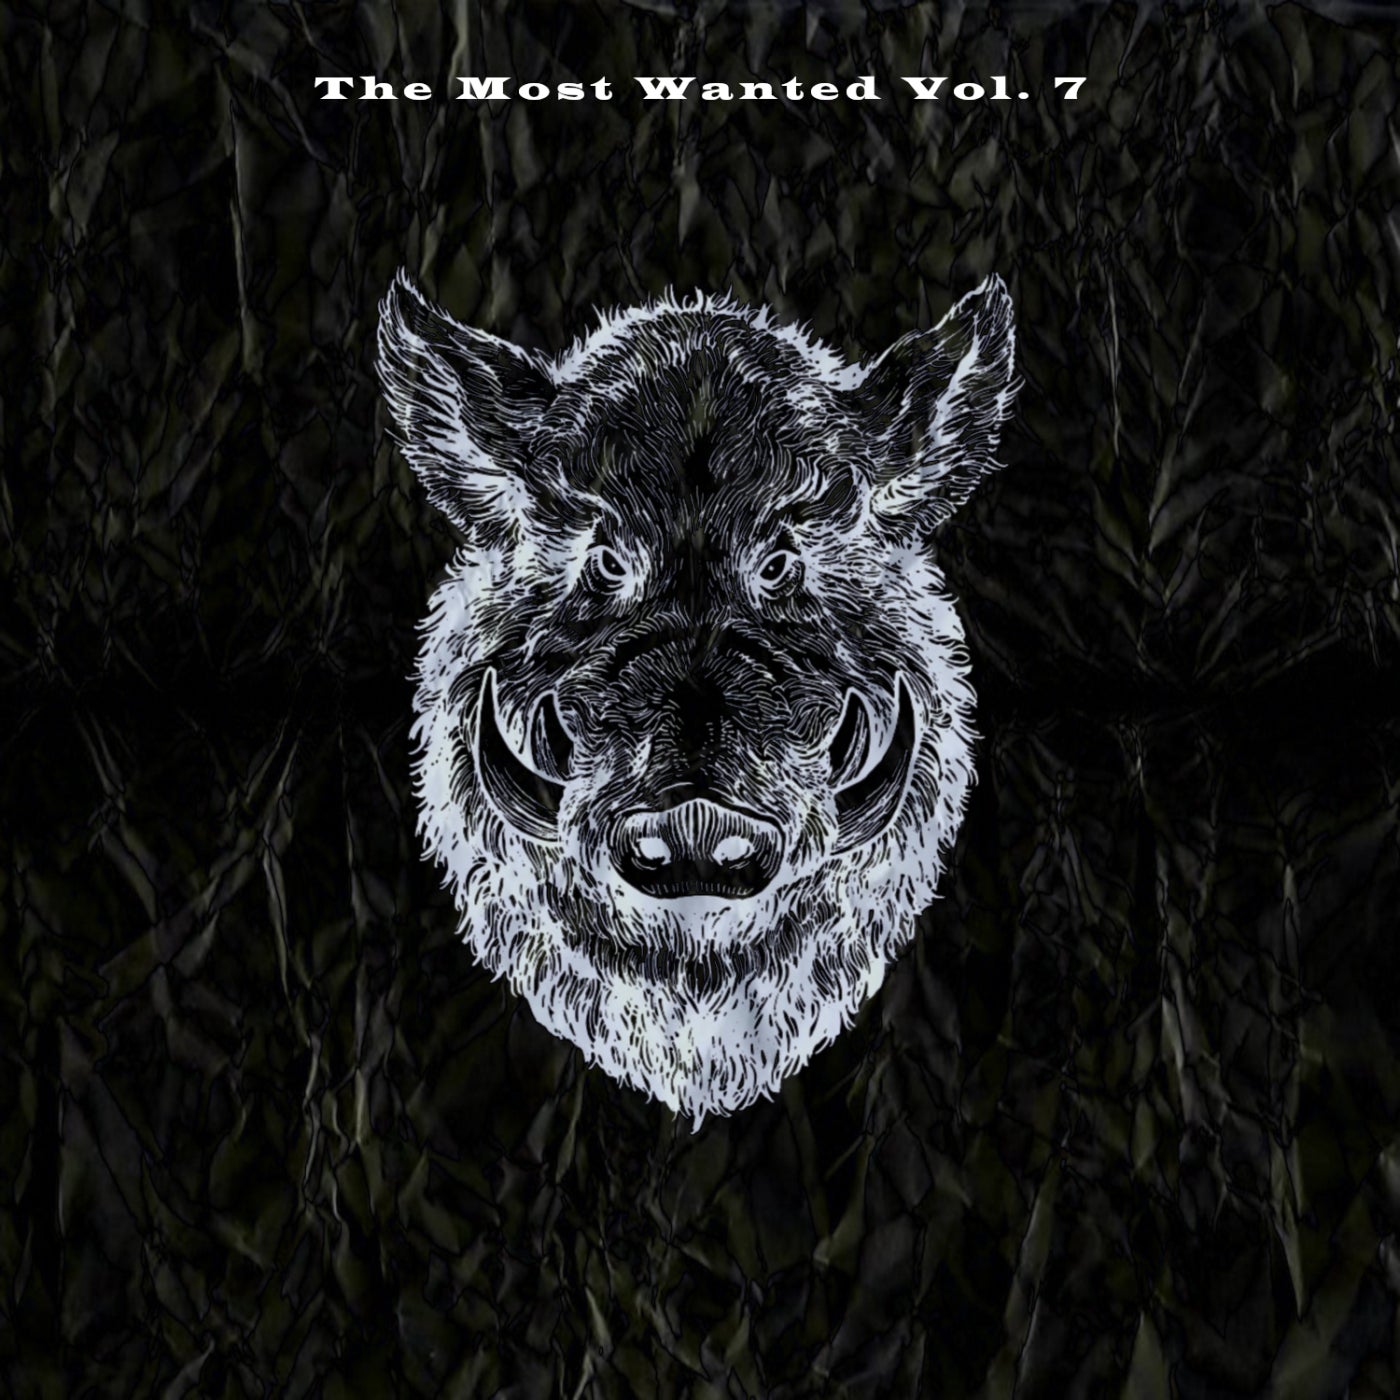 The Most Wanted Vol. 7